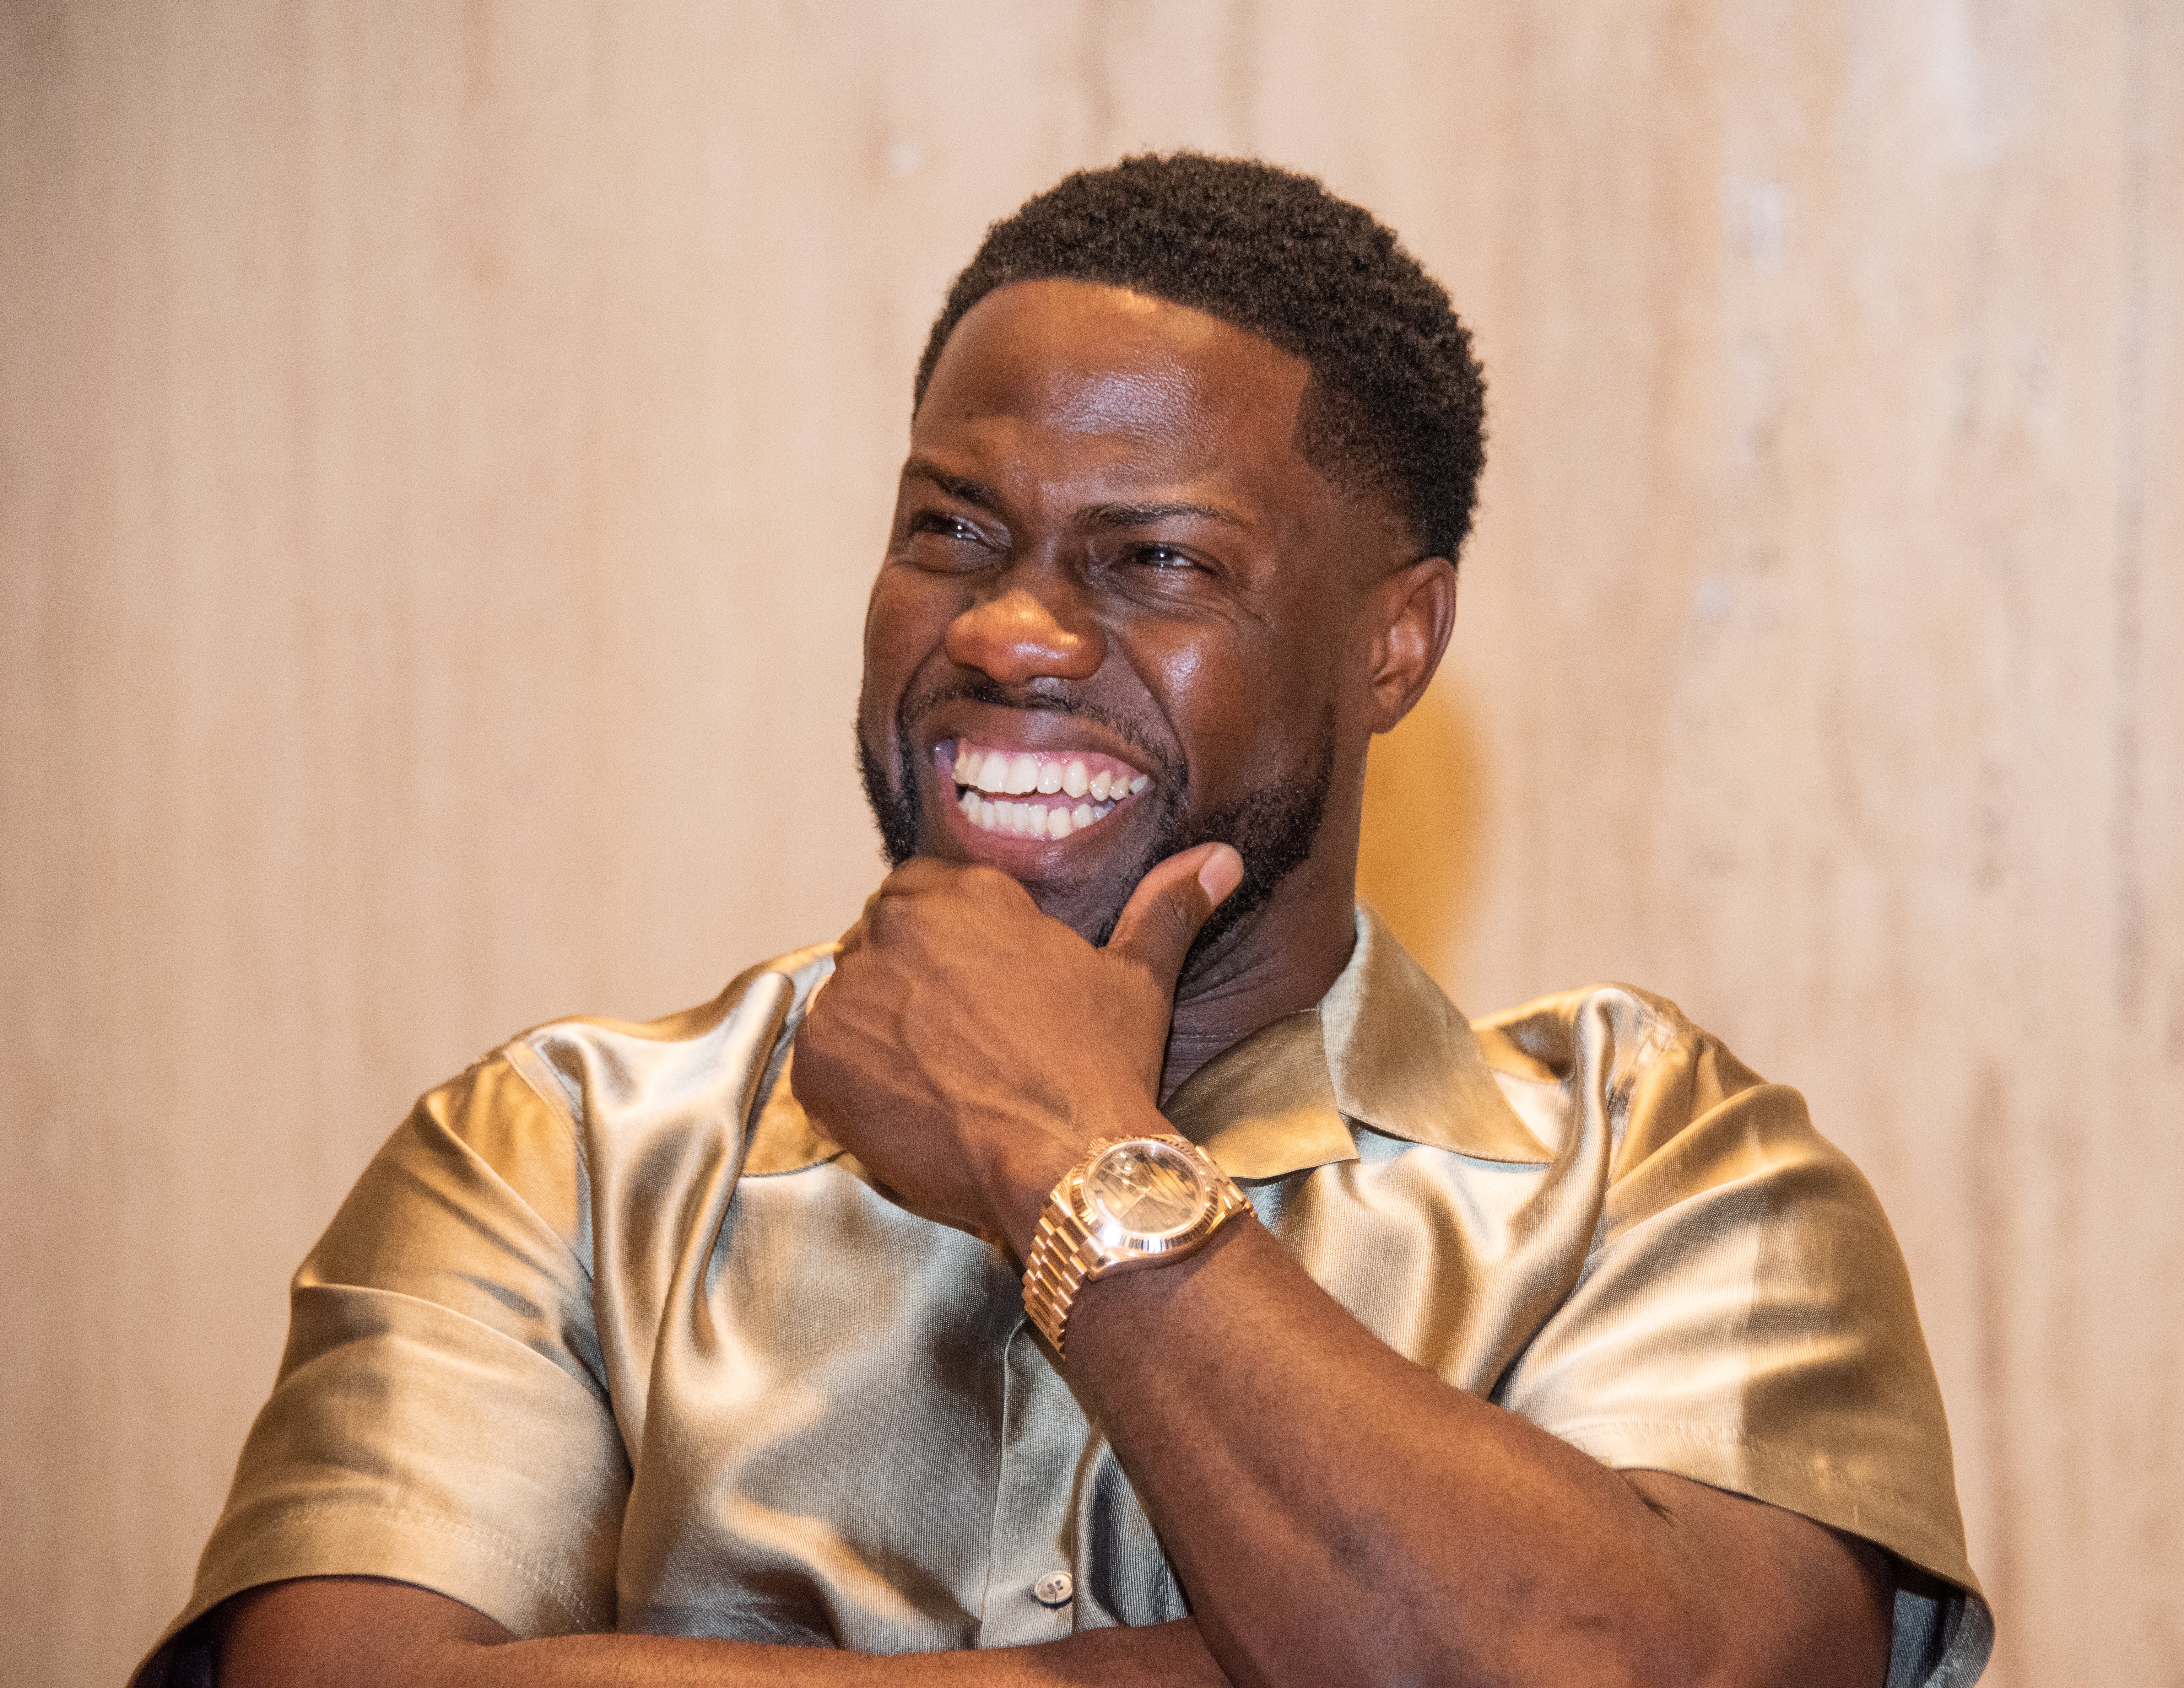 Kevin Hart at the "Jumanji: Next Level" press conference on November 23, 2019 in Cabo San Lucas, Mexico. | Source: Getty Images